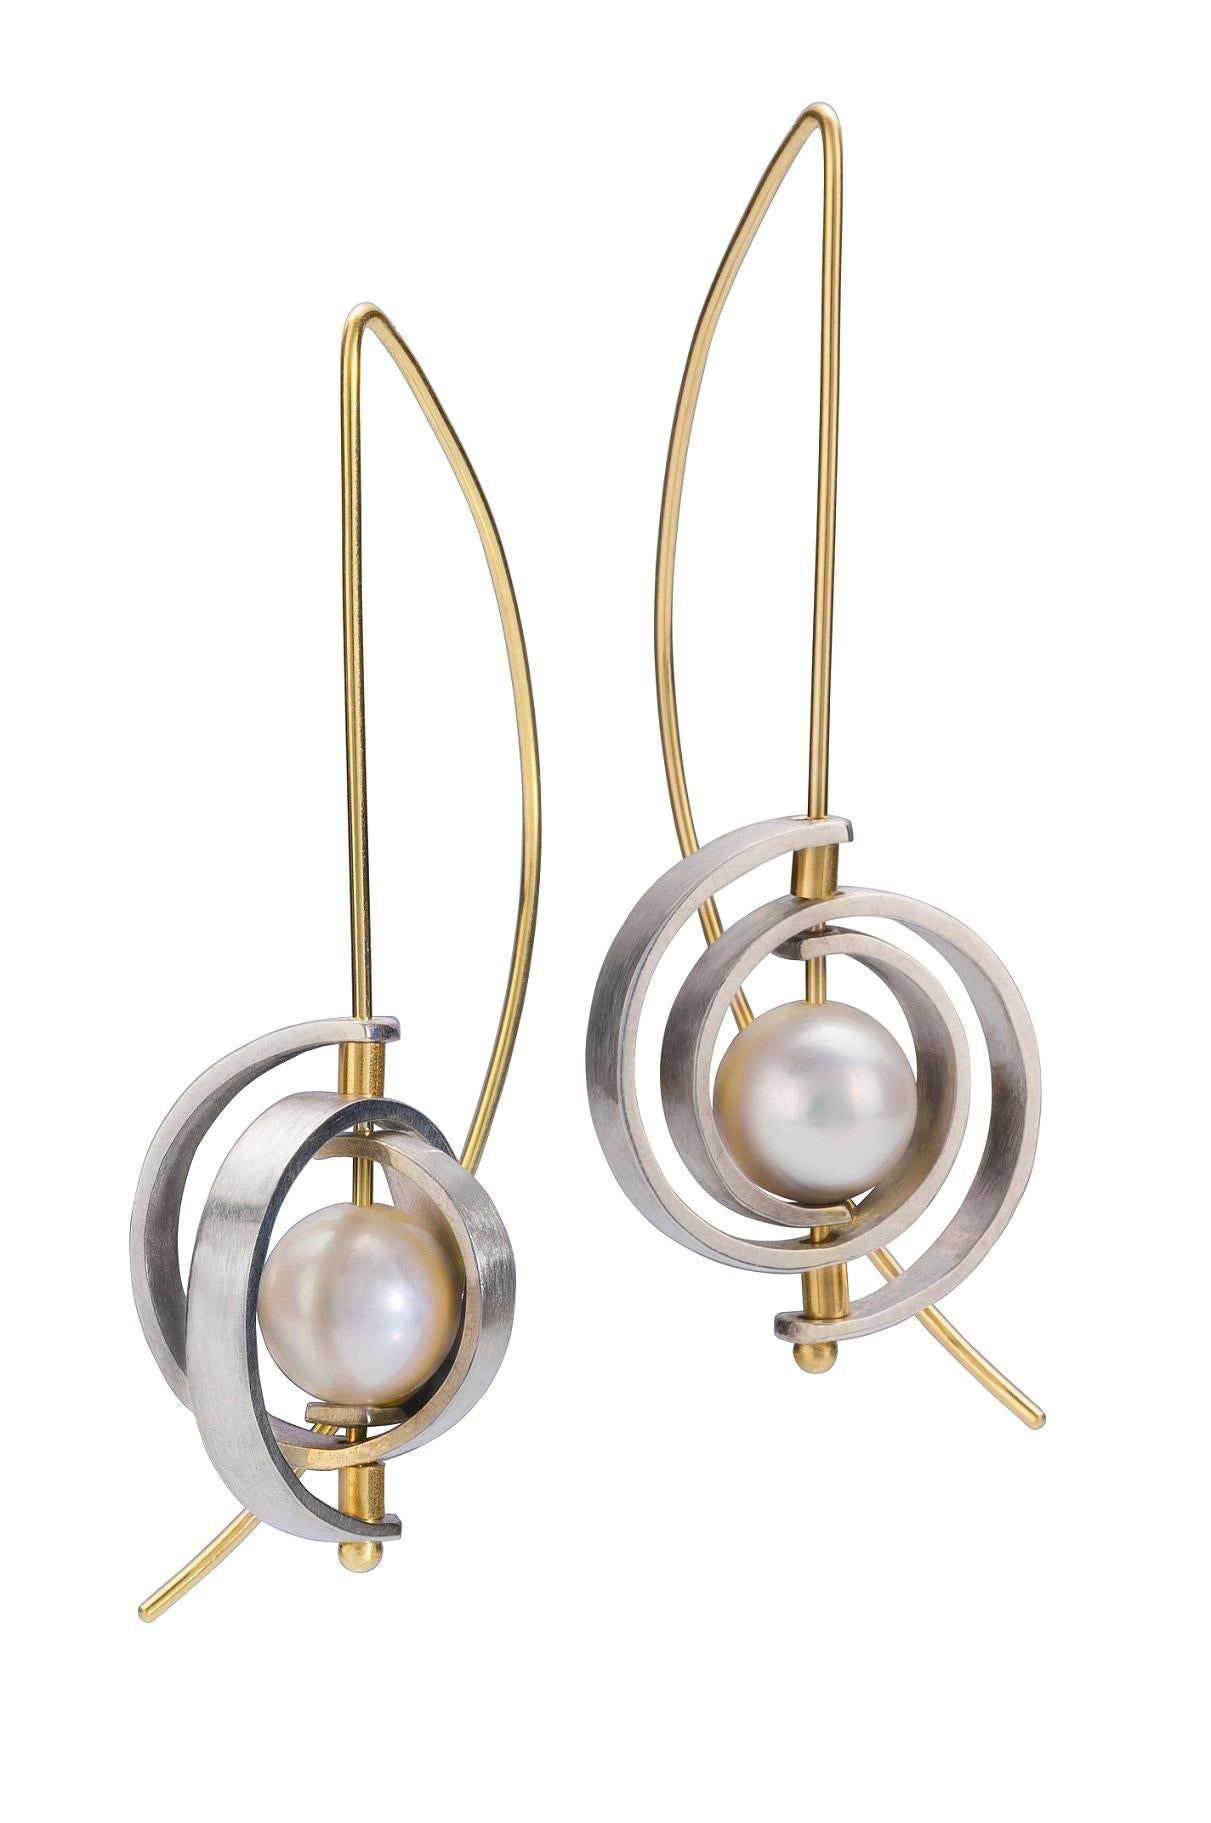 These pearl earrings are a modern classic. They are Medium Spiral Dangle Earrings from the Orbit collection with sterling silver spirals, a 20 gauge ear wire and a lustrous, 7-8.5mm Akoya pearl. The earrings hang 2